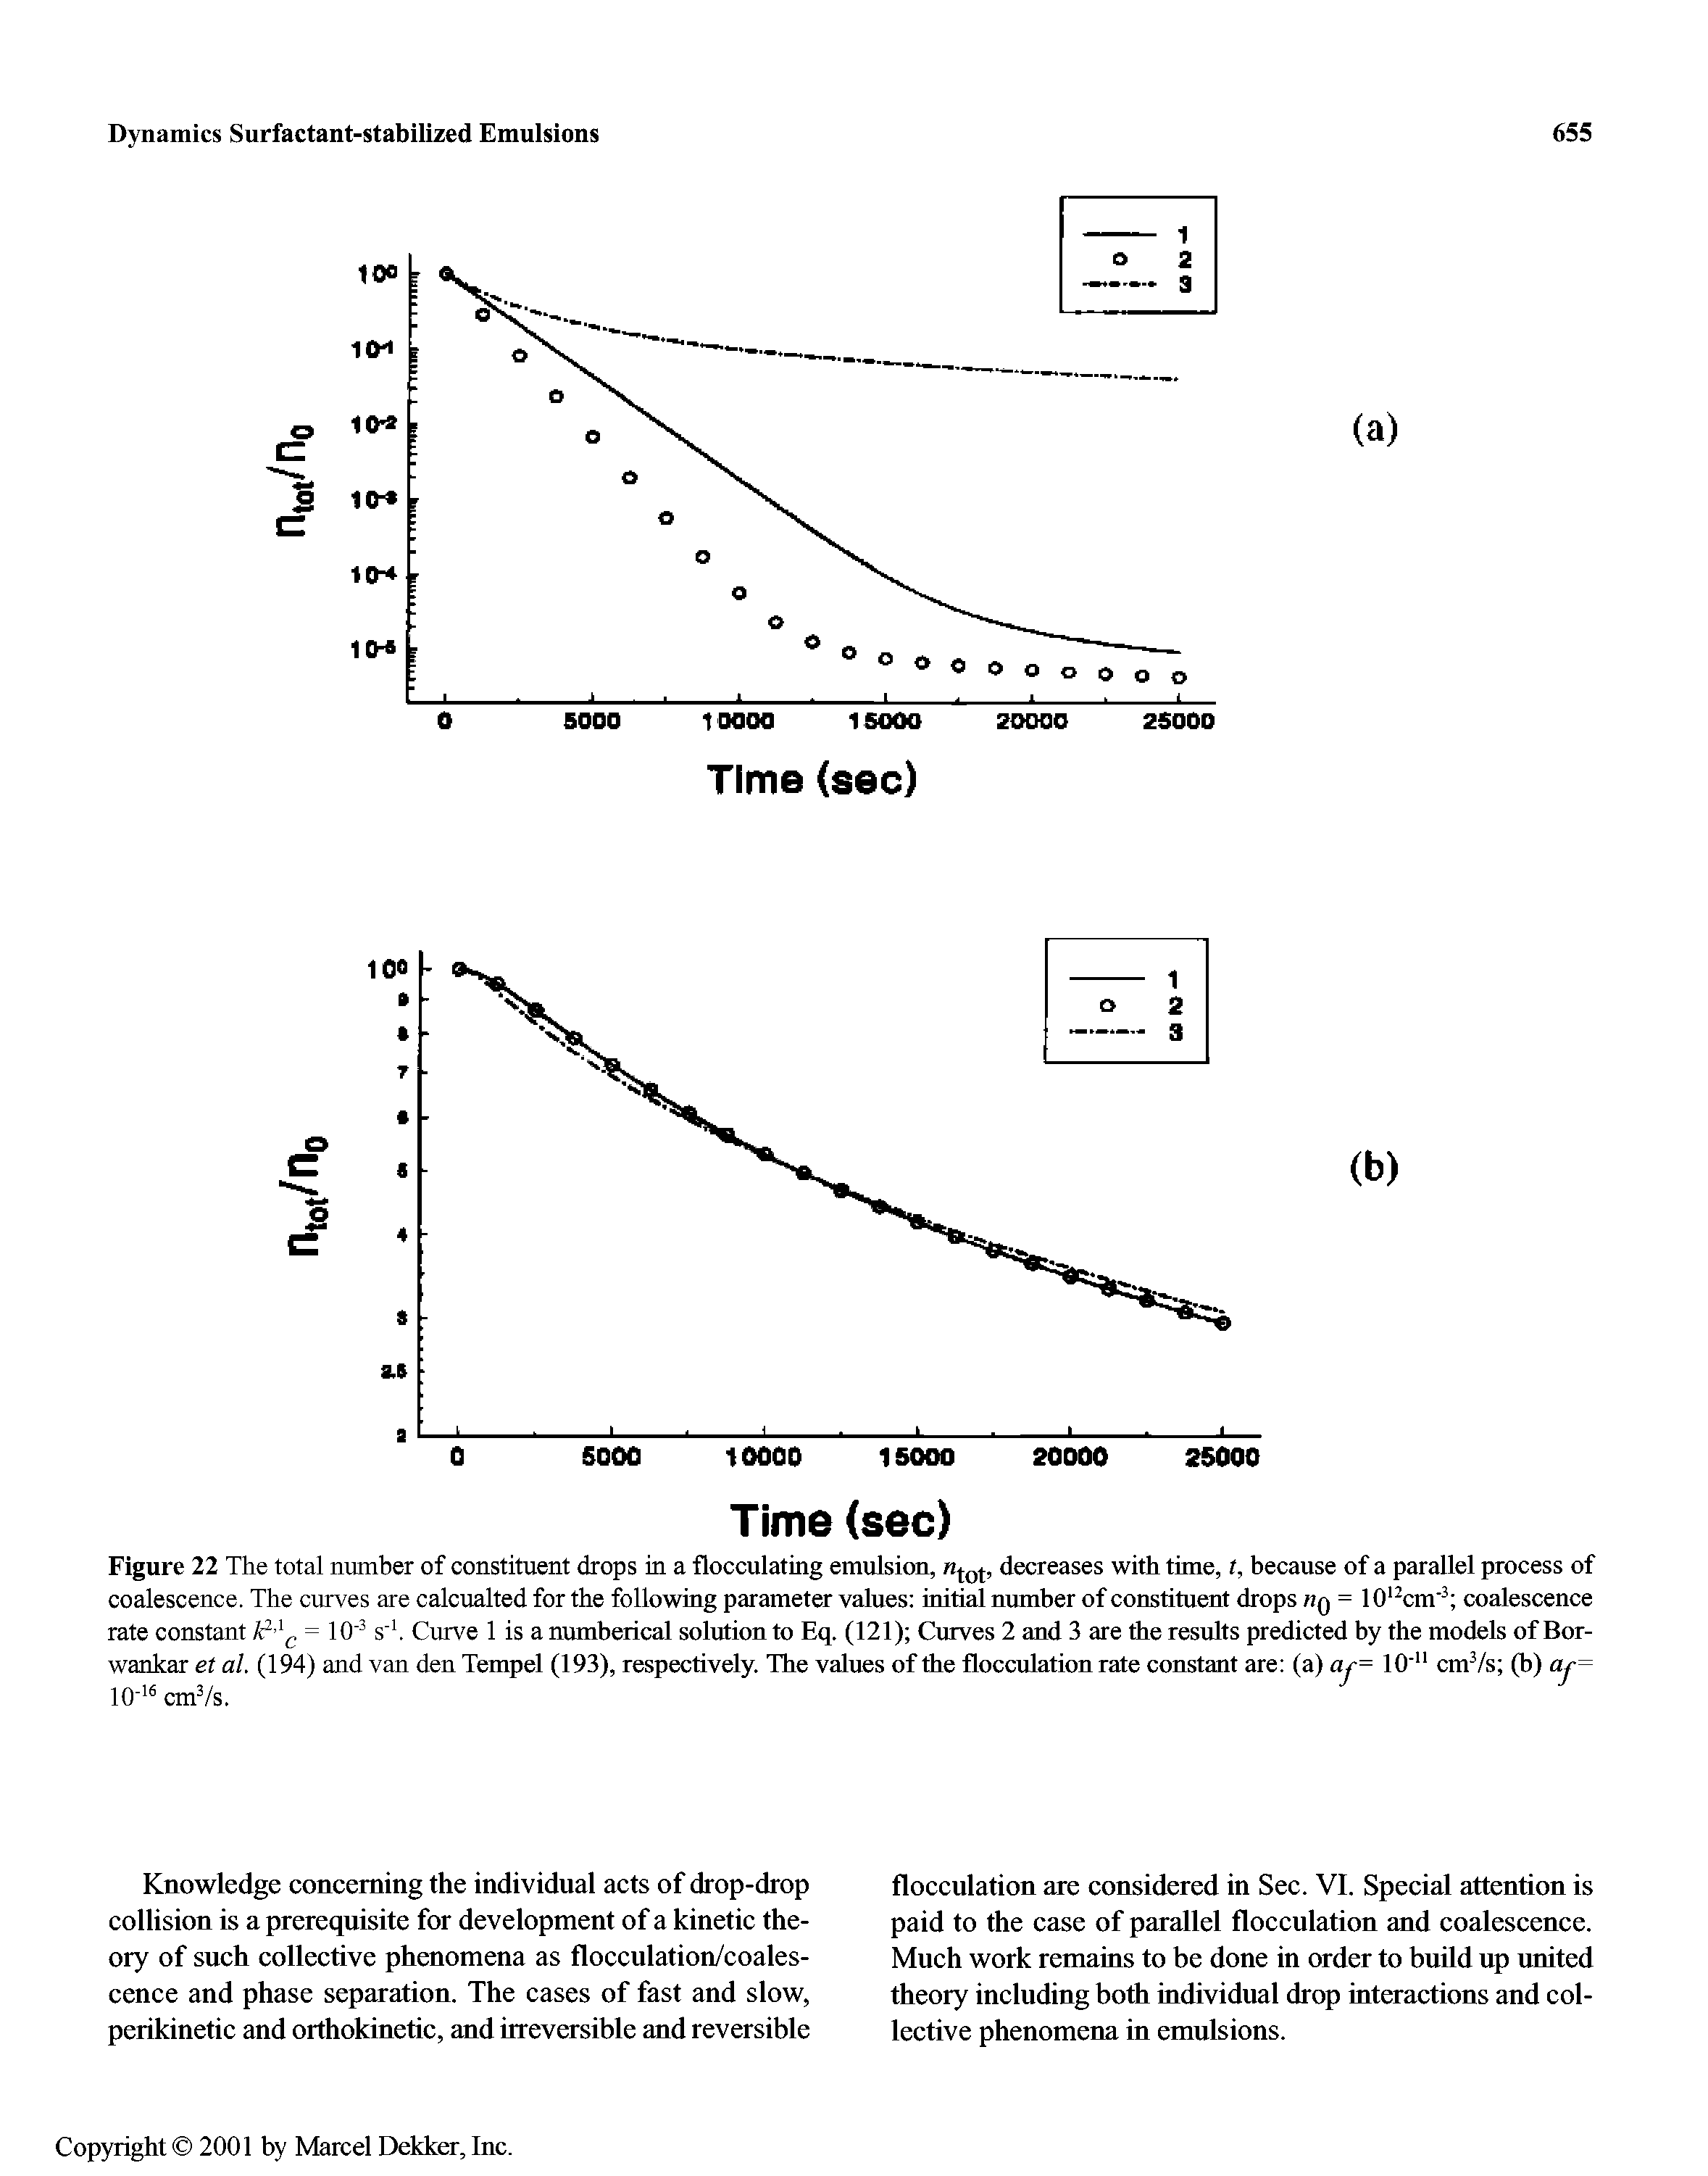 Figure 22 The total number of constituent drops in a flocculating emulsion, decreases with time, t, because of a parallel process of coalescence. The curves are calcualted for the following parameter values initial number of constituent drops iiq = lO cm coalescence rate constant F = 10 s h Curve 1 is a numbeiical solution to Eq. (121) Curves 2 and 3 are the results predicted by the models of Bor-wankar et al. (194) and van den Tempel (193), respectively. The values of the flocculation rate constant are (a) ar= 10 " cmVs (b) ar=...